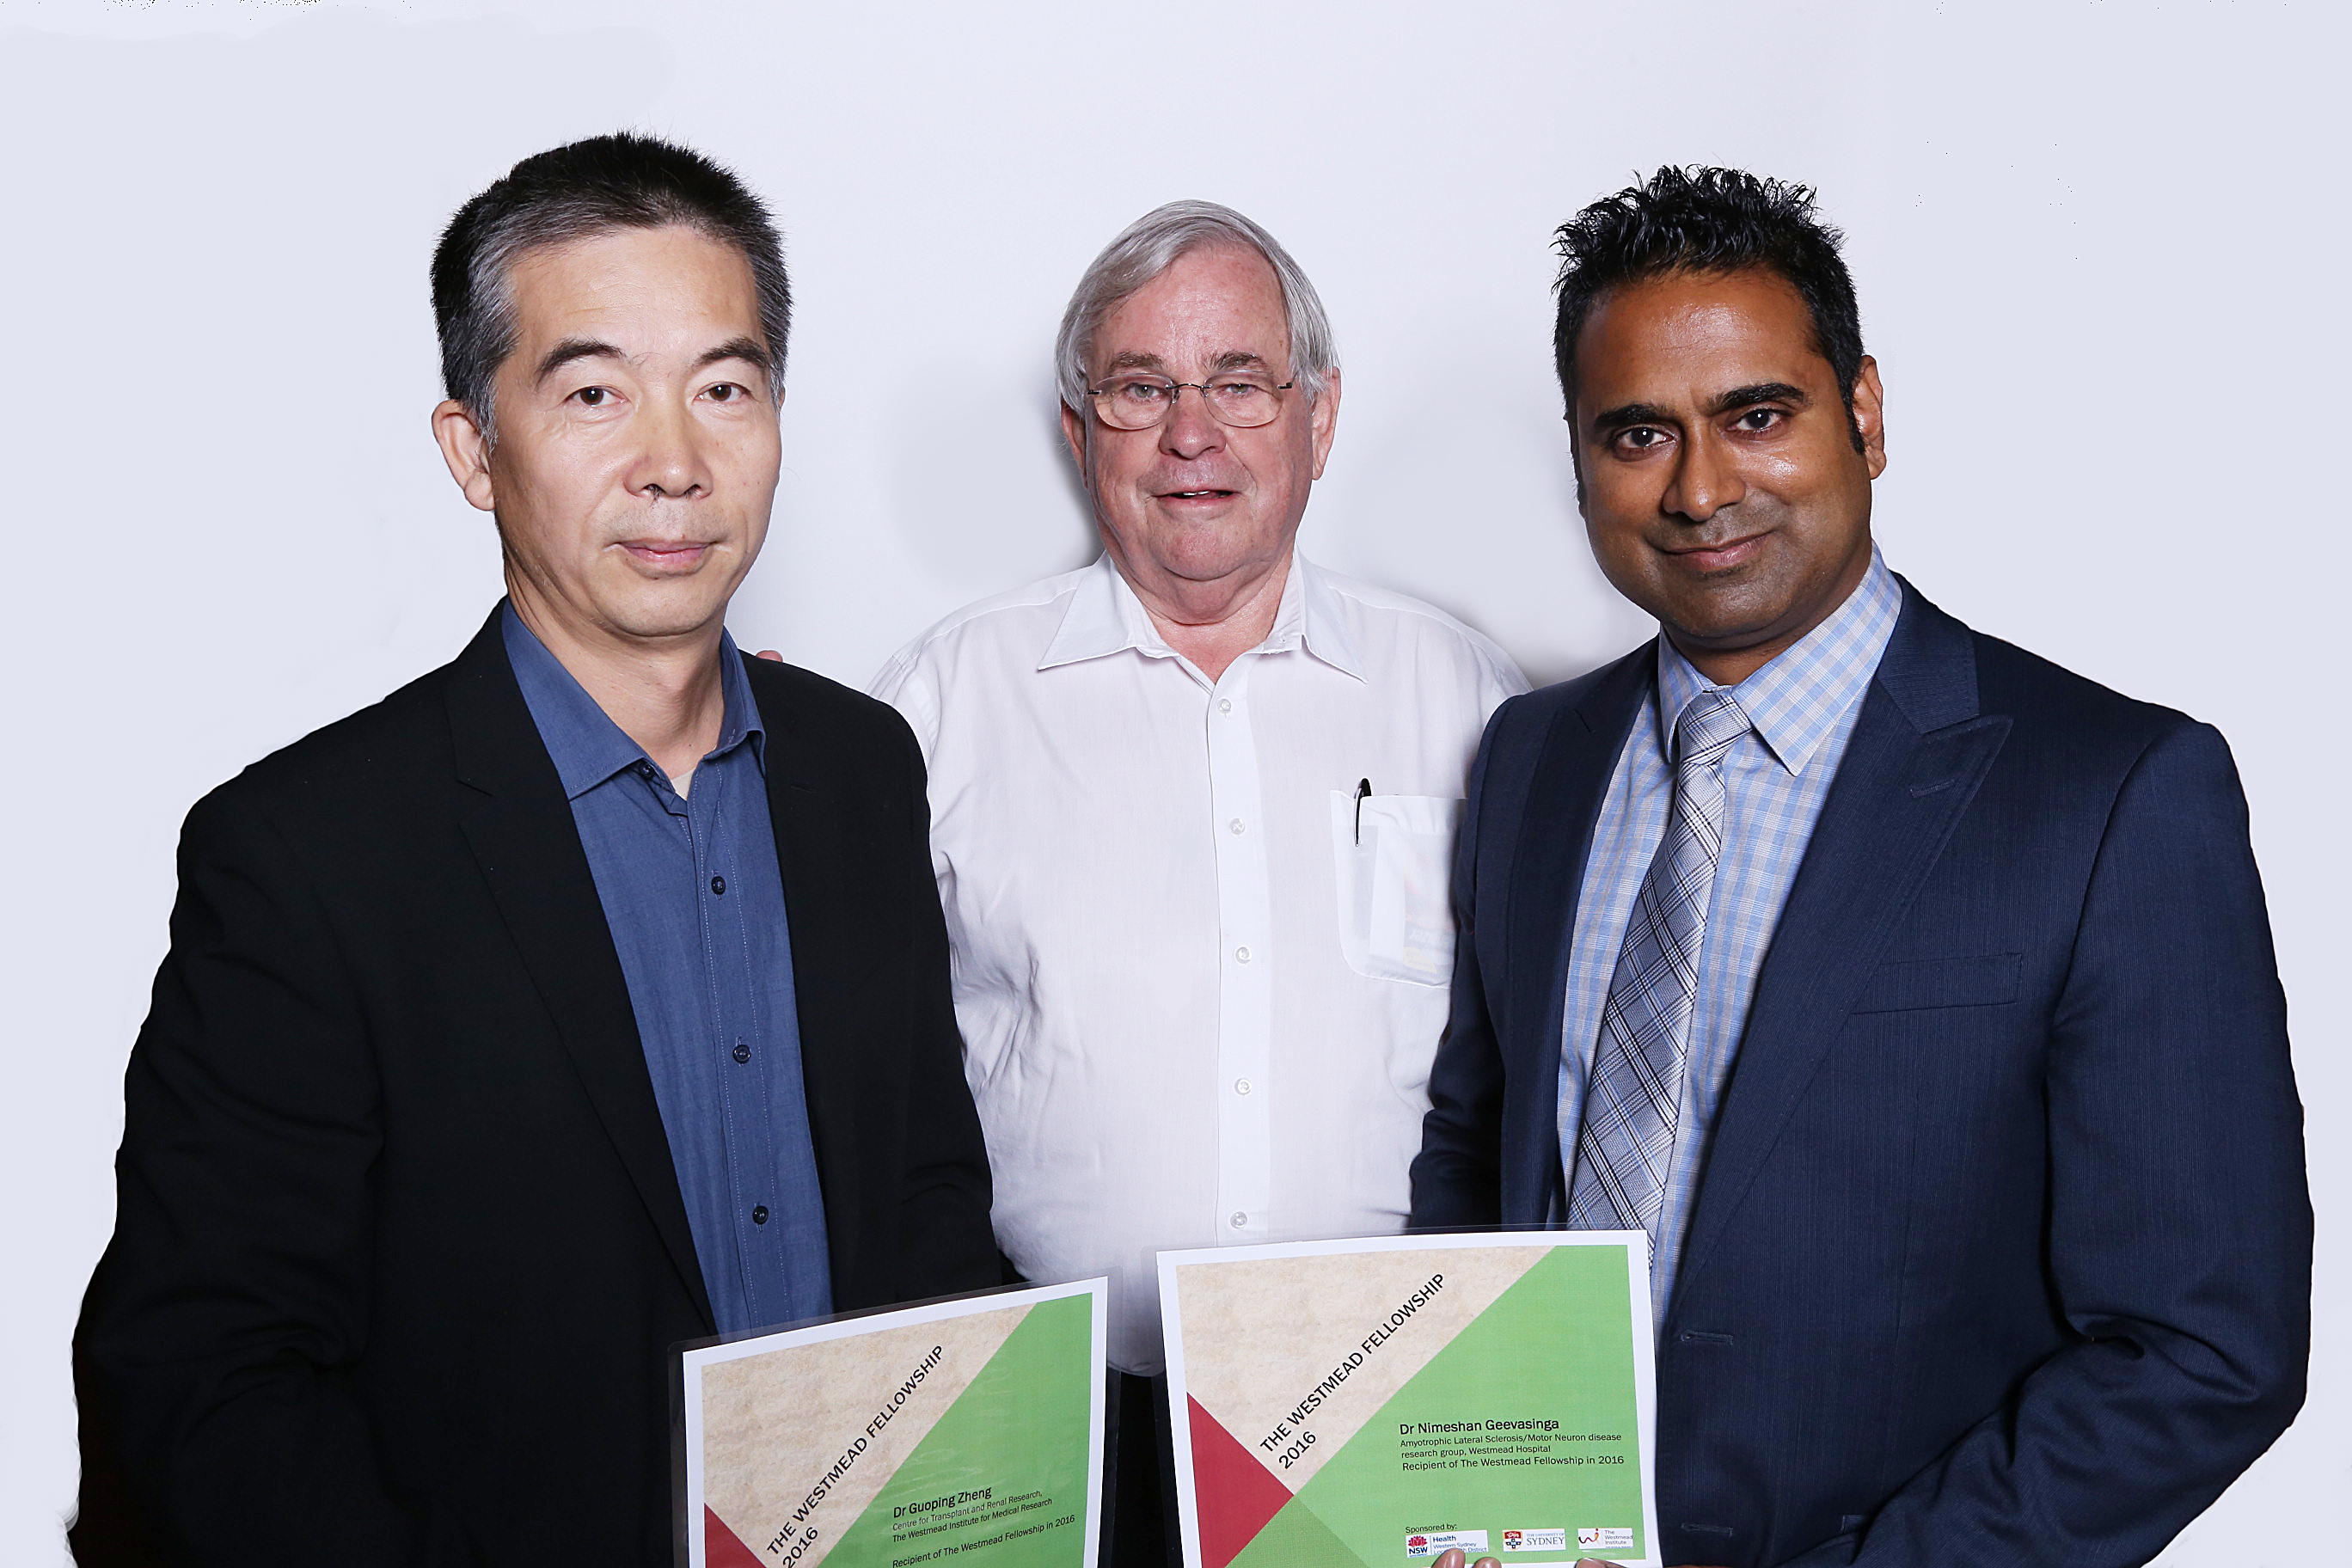 WSLHD Research and Education director Emeritus Professor Stephen Leeder (centre) presents Dr Zheng (left) and Dr Geevasinga